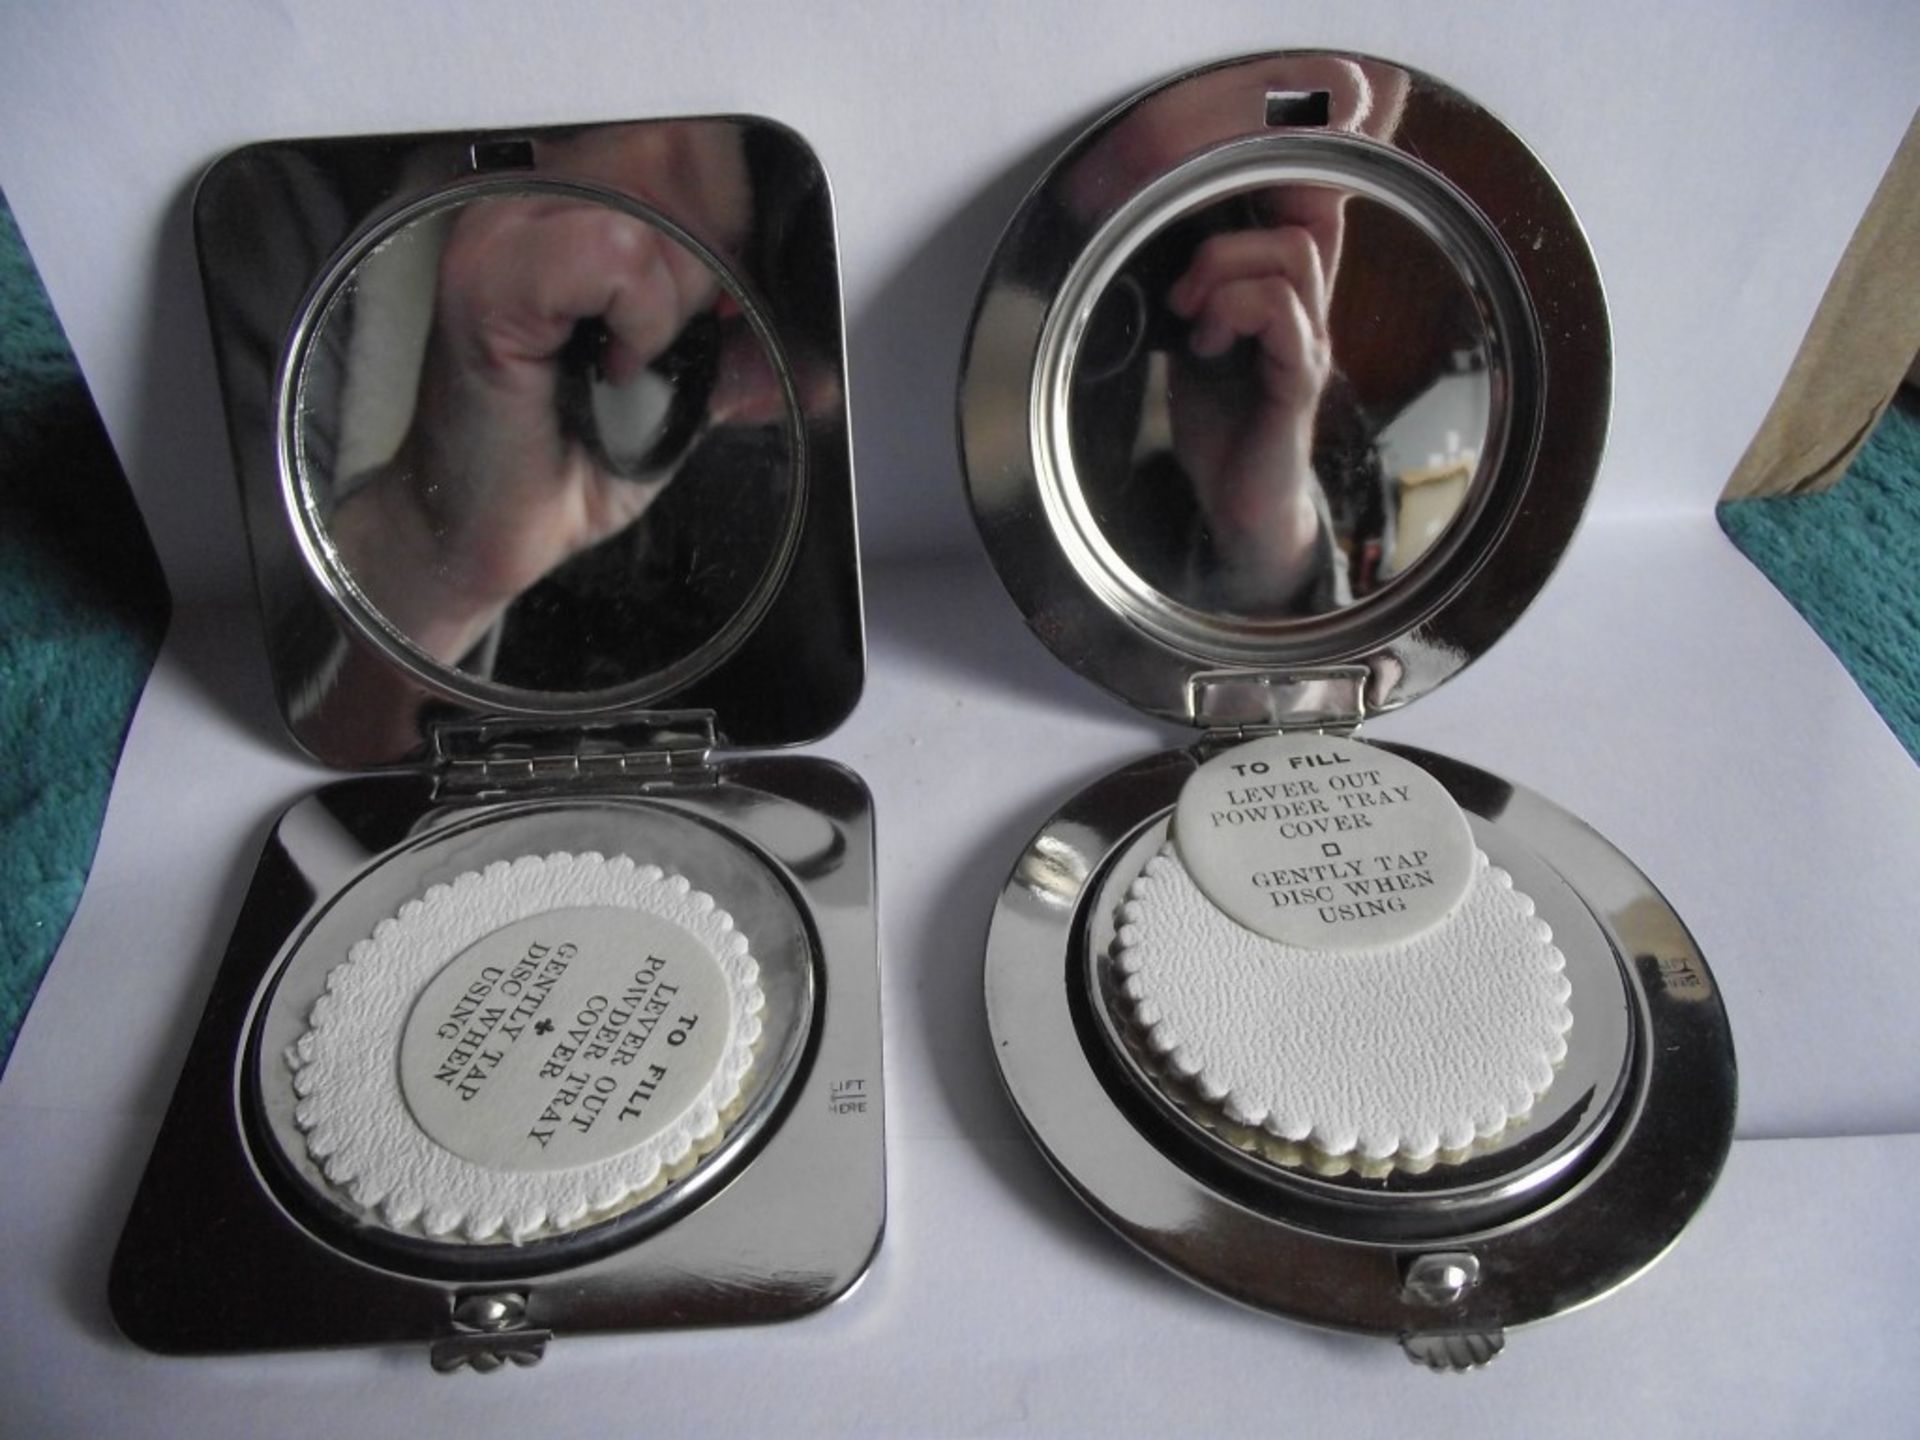 5 X 1930's Gwenda Powder Compacts & Cigarette Case - New Old Stock (unused)- original boxes. - Image 9 of 16